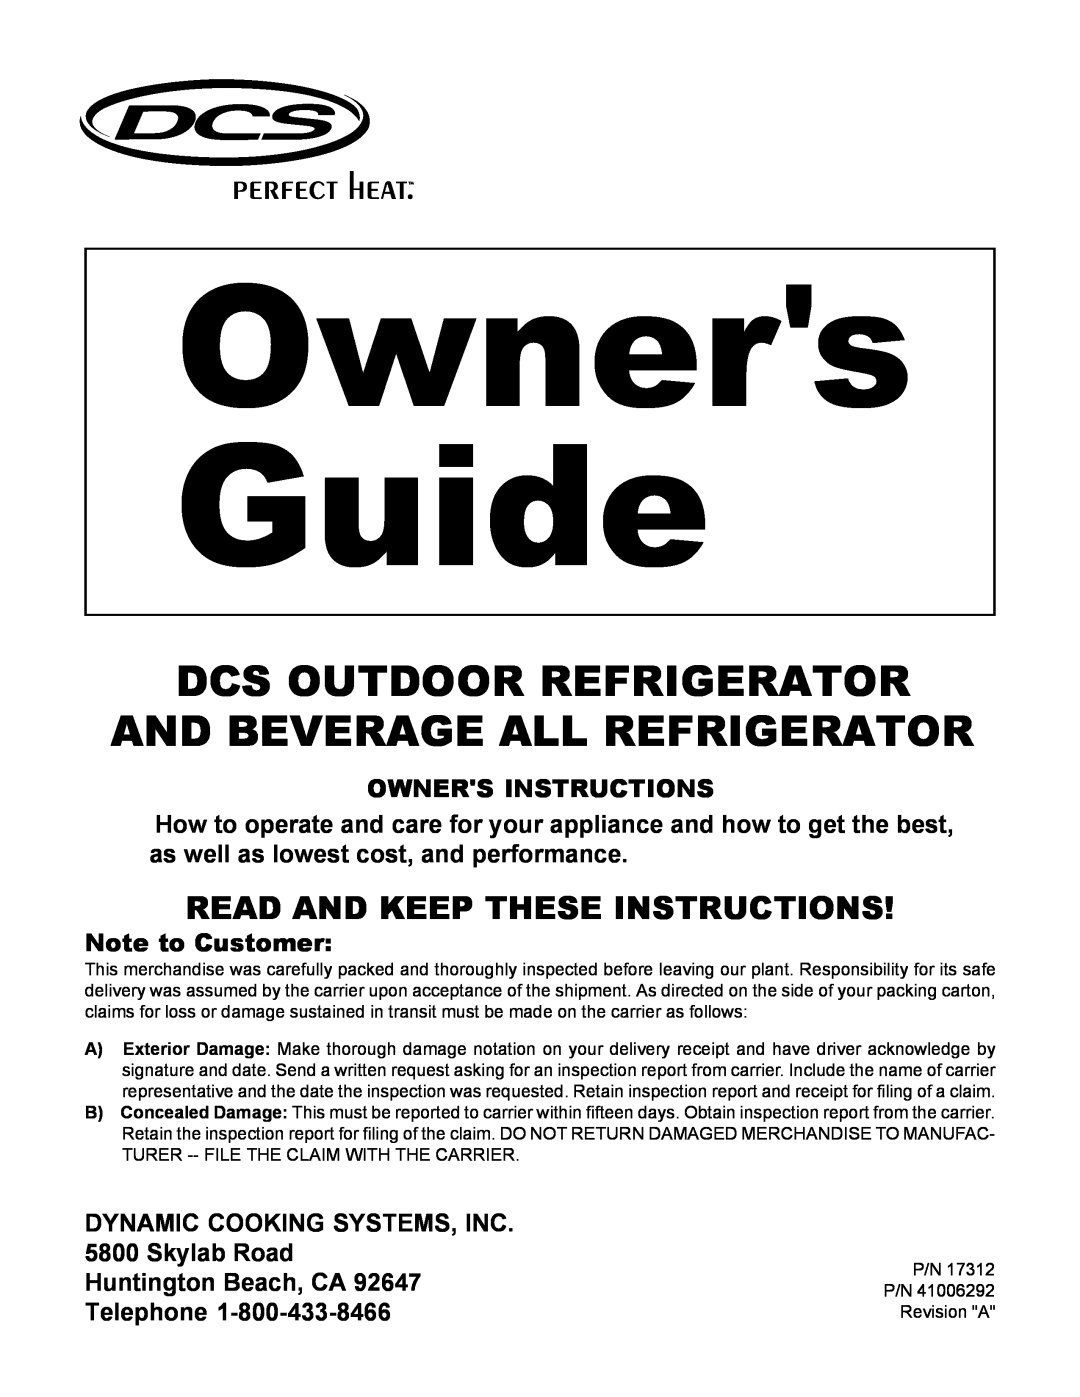 DCS OUTDOOR REFRIGERATOR AND BEVERAGE ALL REFRIGERATOR manual Dcs Outdoor Refrigerator, And Beverage All Refrigerator 